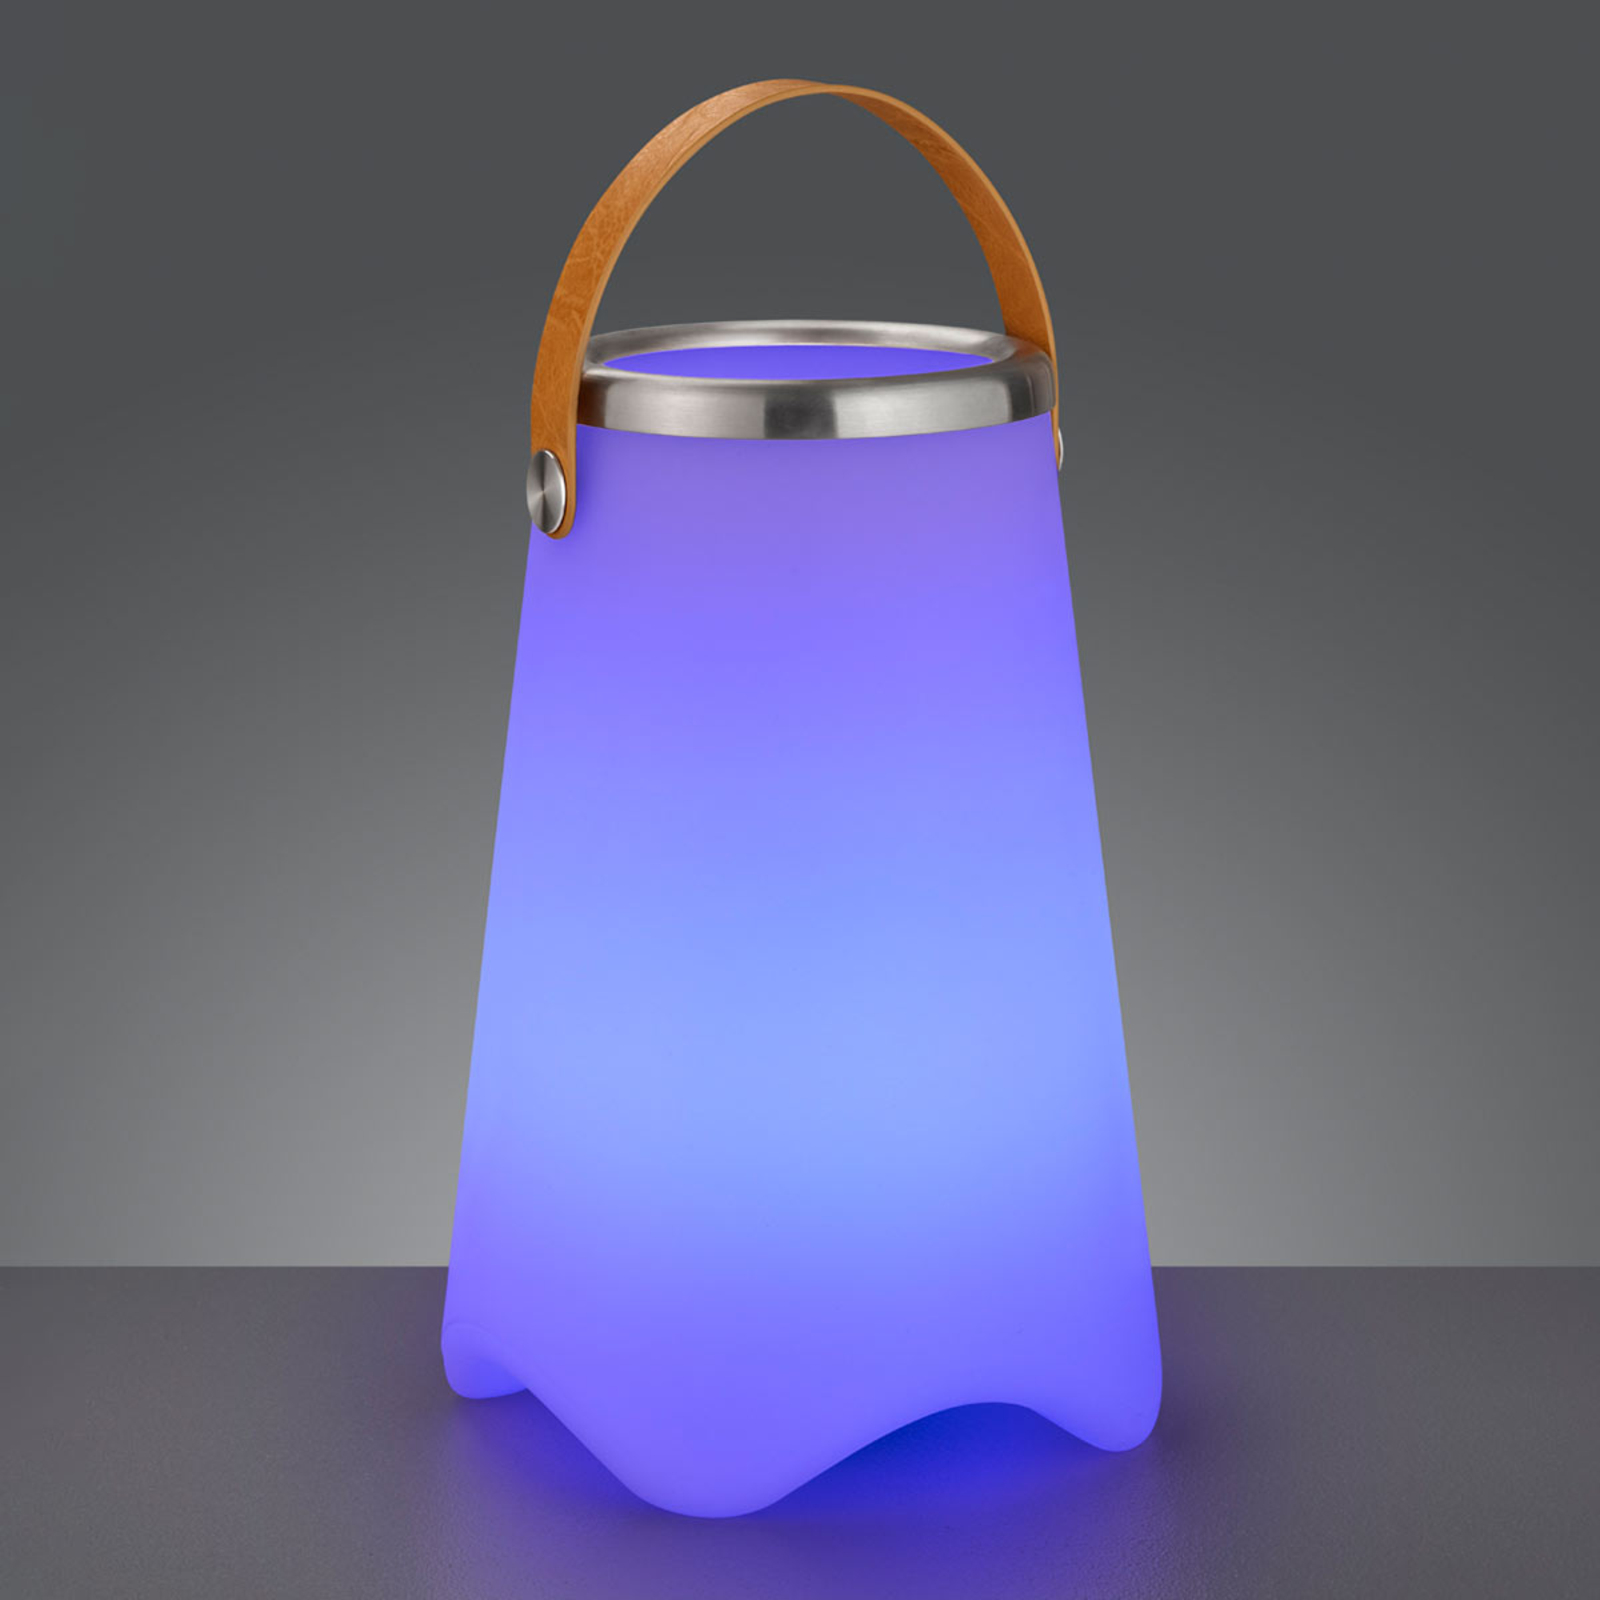 Jamaica LED table lamp with Bluetooth speaker